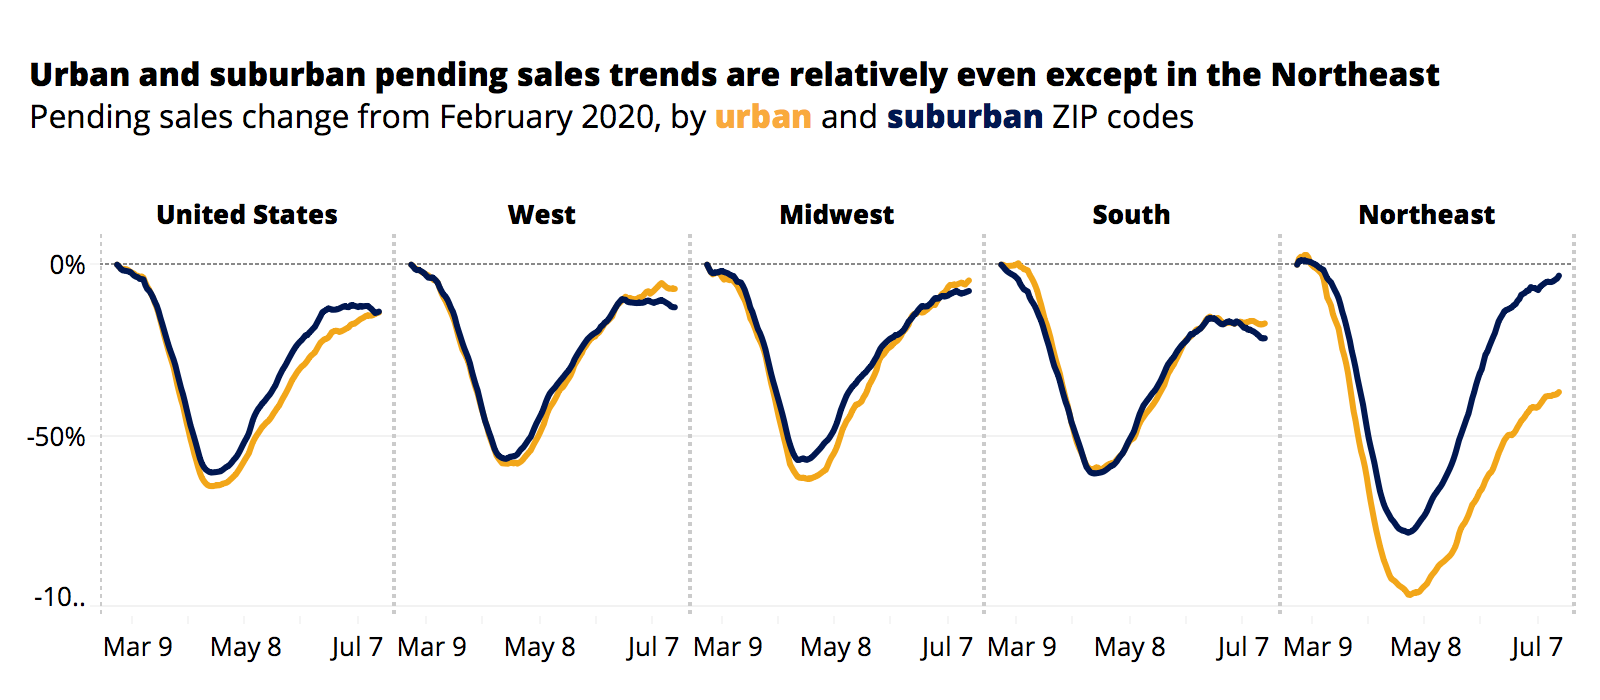 Urban and suburban pending sales trends are relatively even